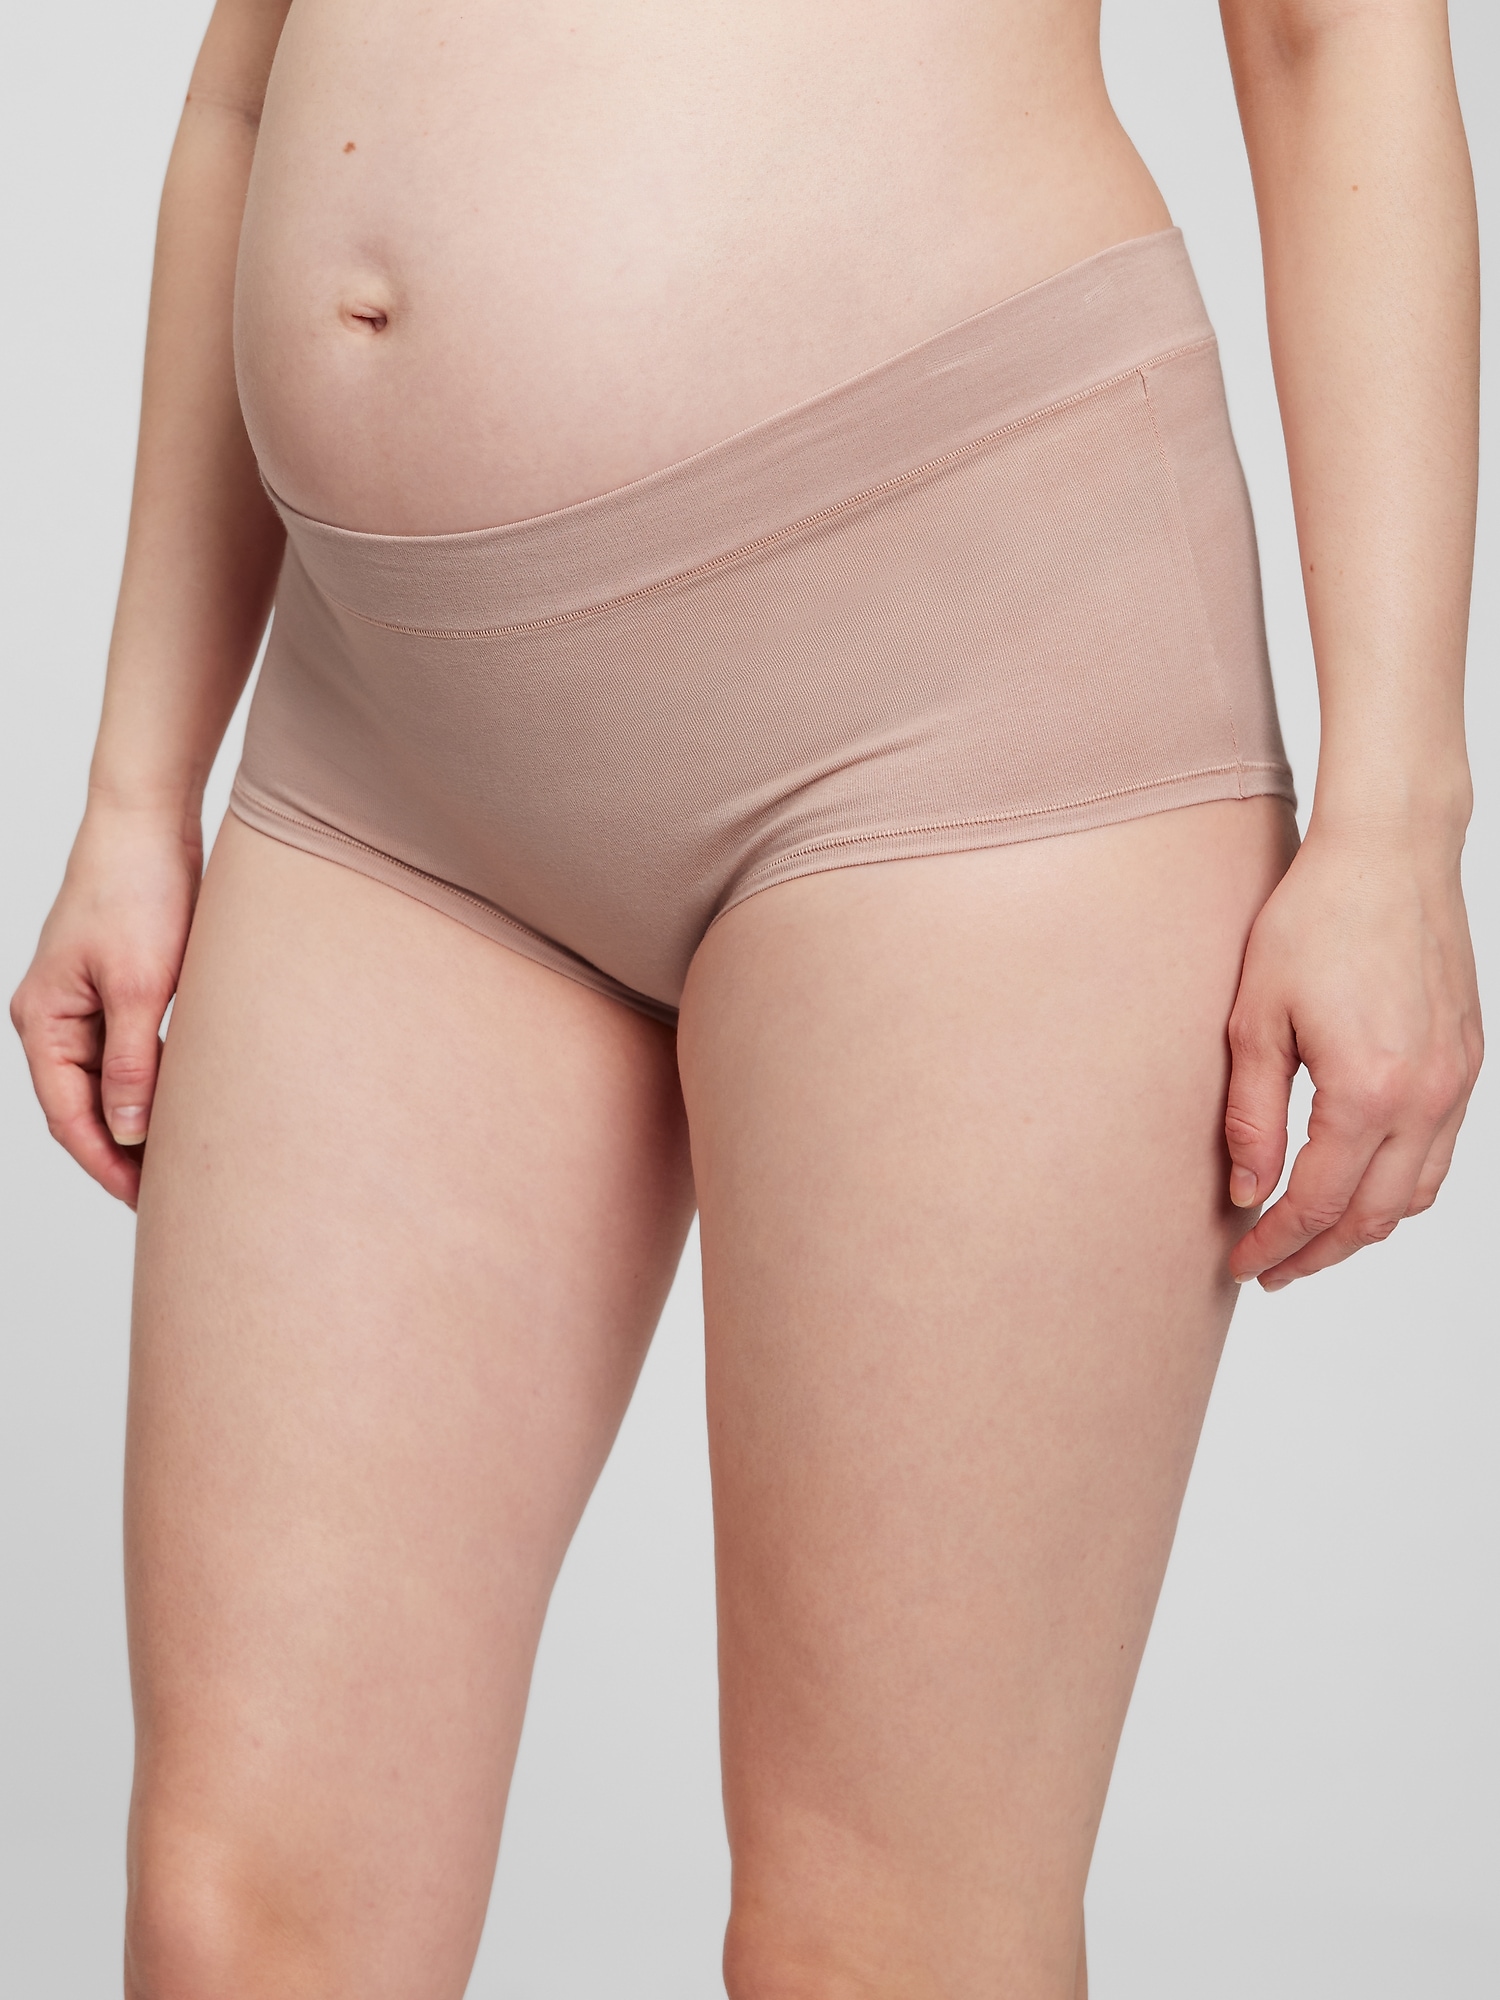 Buy online Pink Cotton Maternity Panty from lingerie for Women by